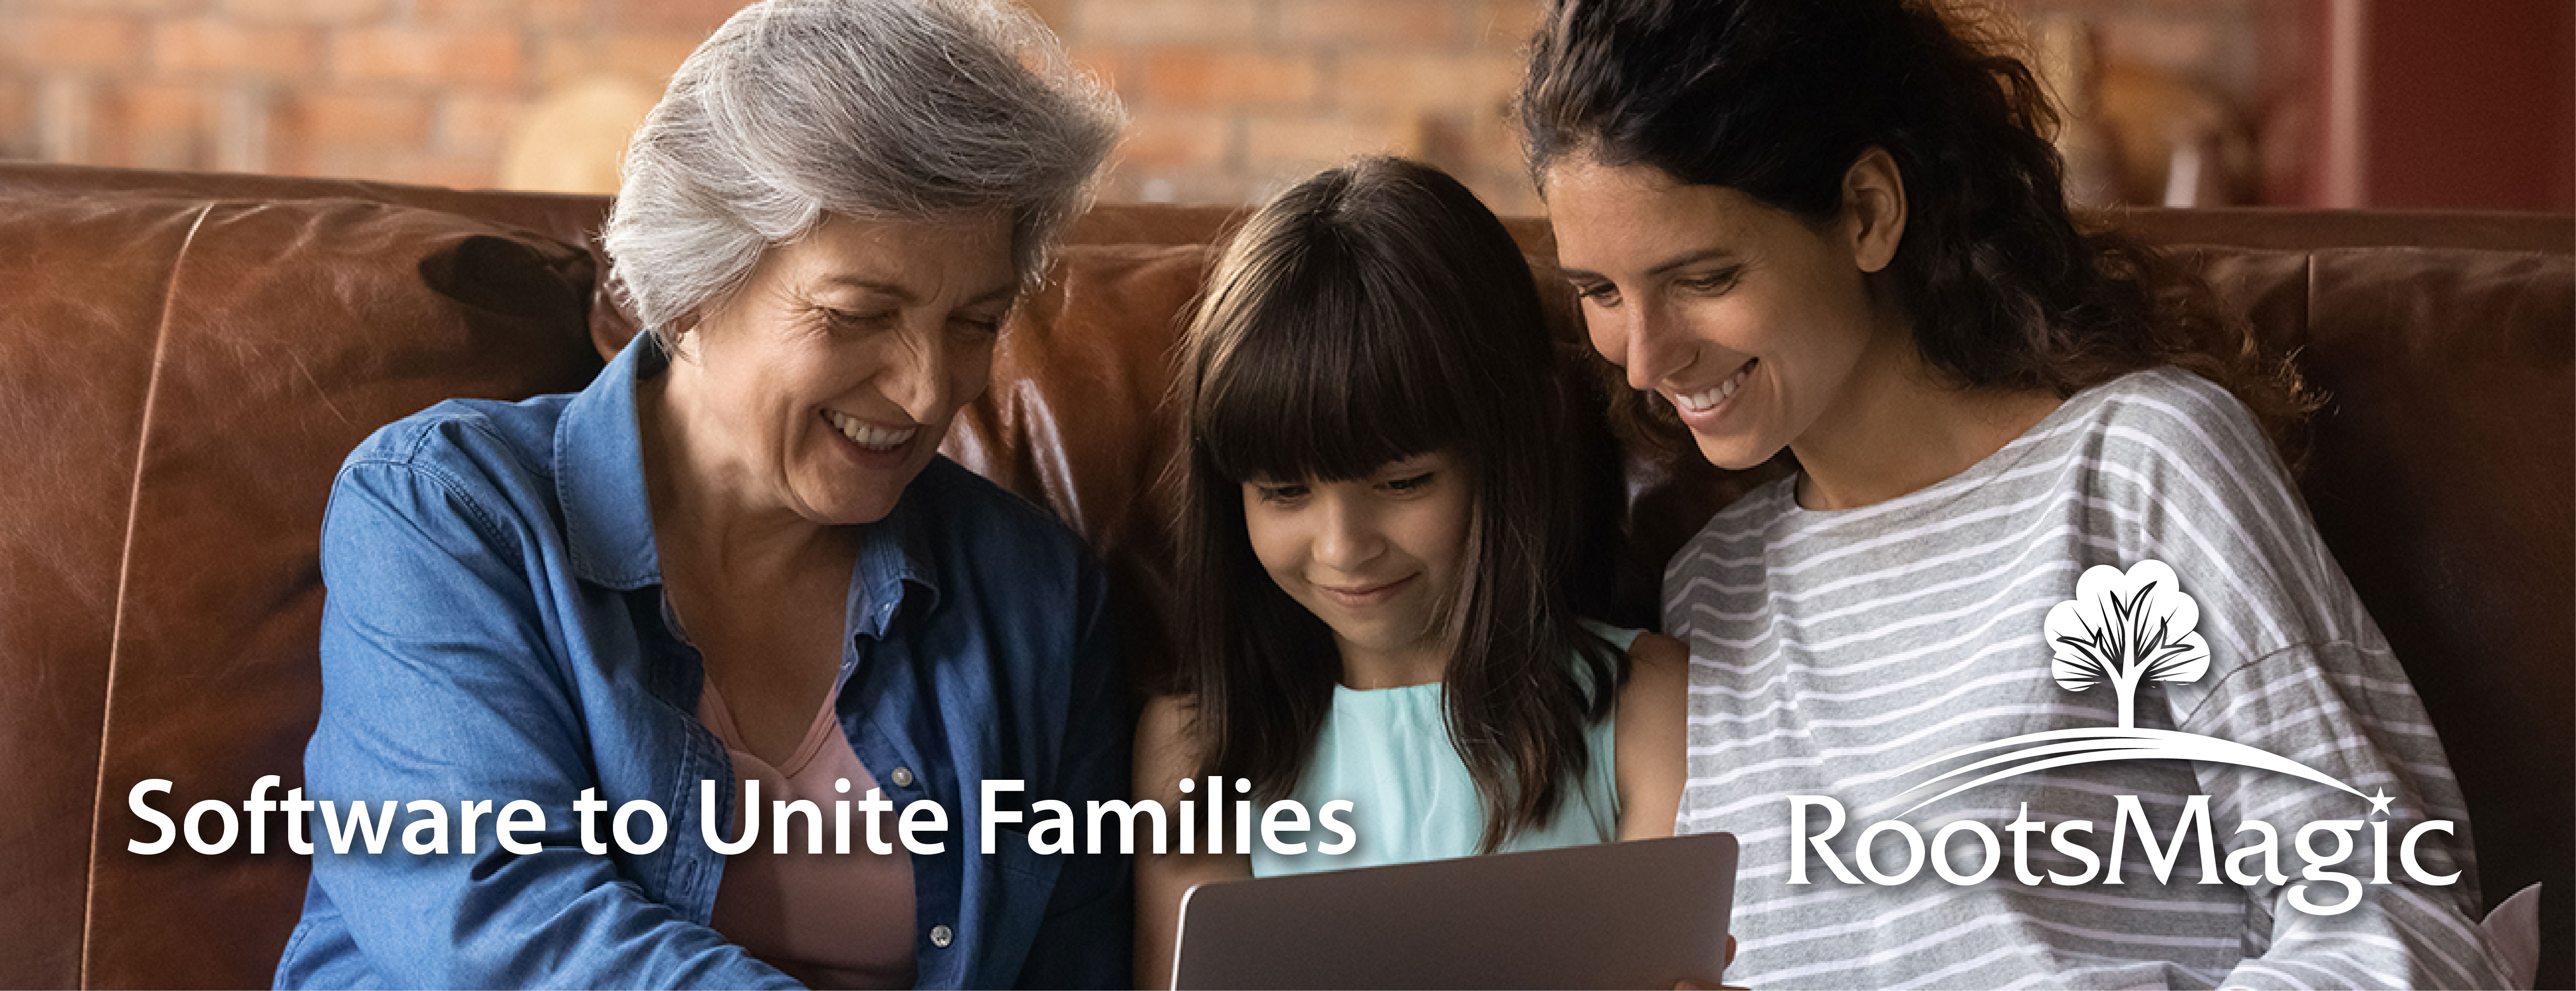 Software to Unite Families